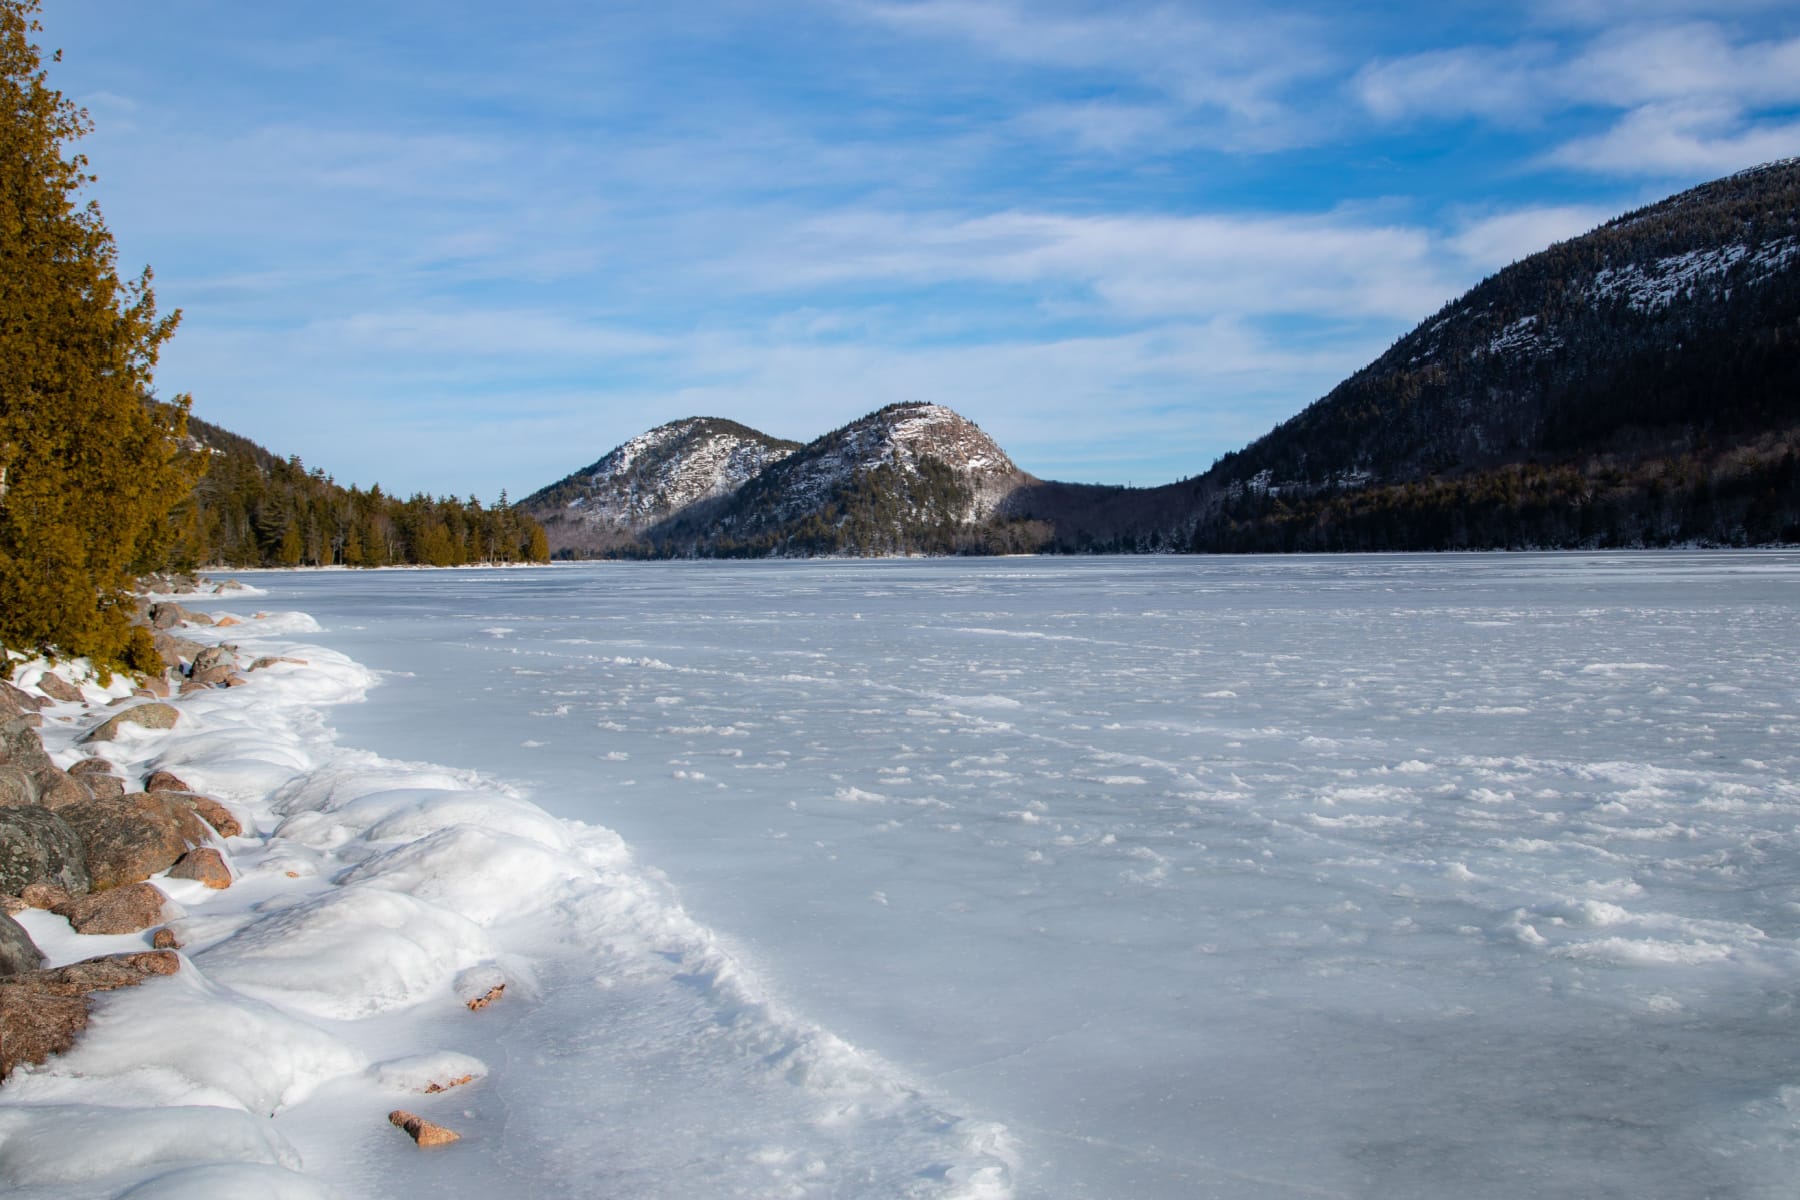 Jordan Pond in Acadia frozen in the winter with mountains in the distance. 